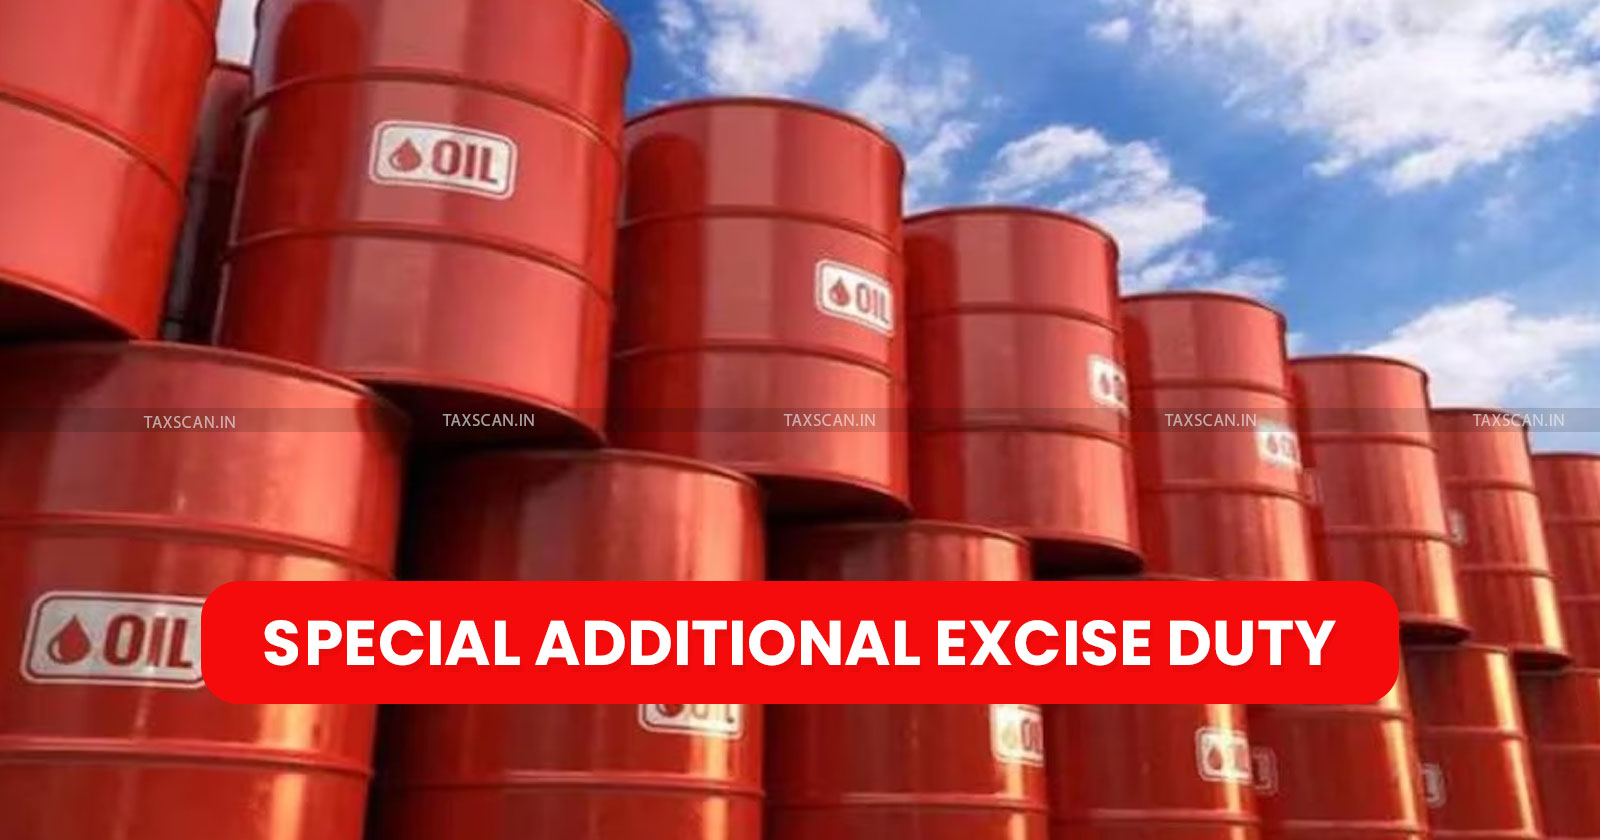 Special Additional Excise Duties - Central Government - Diesel - Crude Oil - Crude Oil Export - profit tax - taxscan